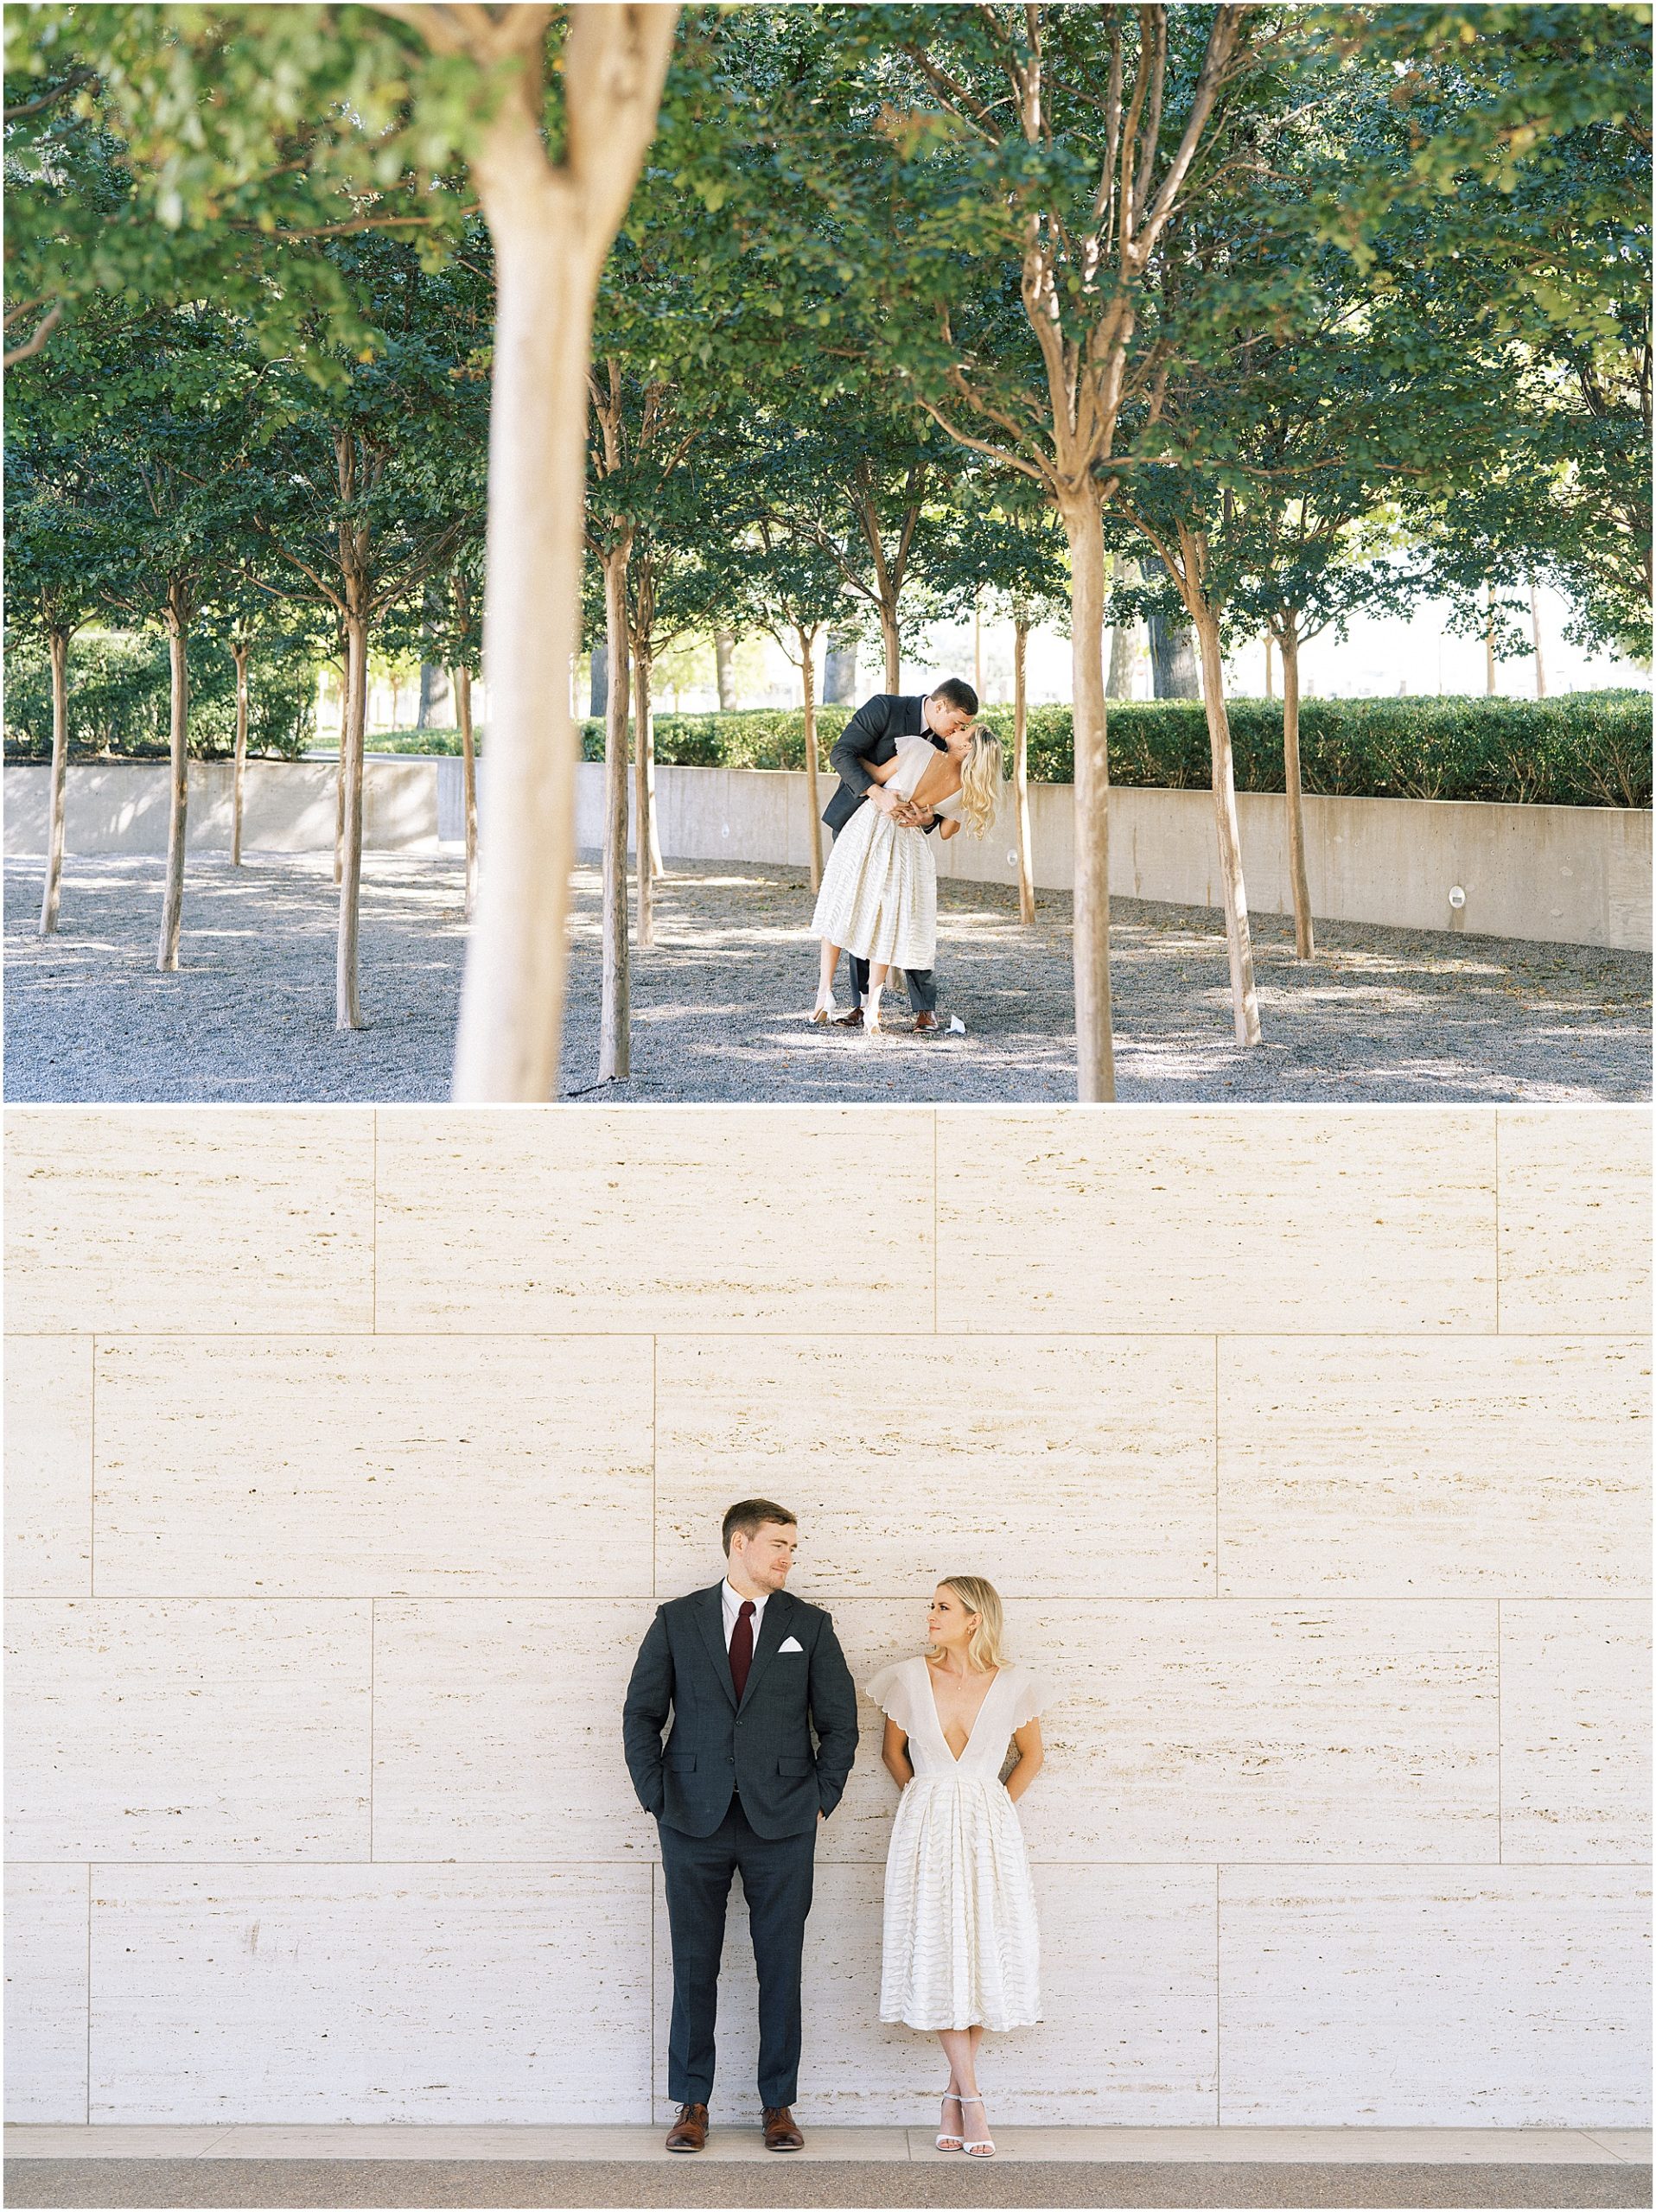 Fort Worth Kimbell Art Museum | Kimbell Art Museum | Fort Worth Photo Locations | Fort Worth, Texas | Fort Worth Photography Locations | Fort Worth Picture Locations | Fort Worth Engagement Photo Locations 